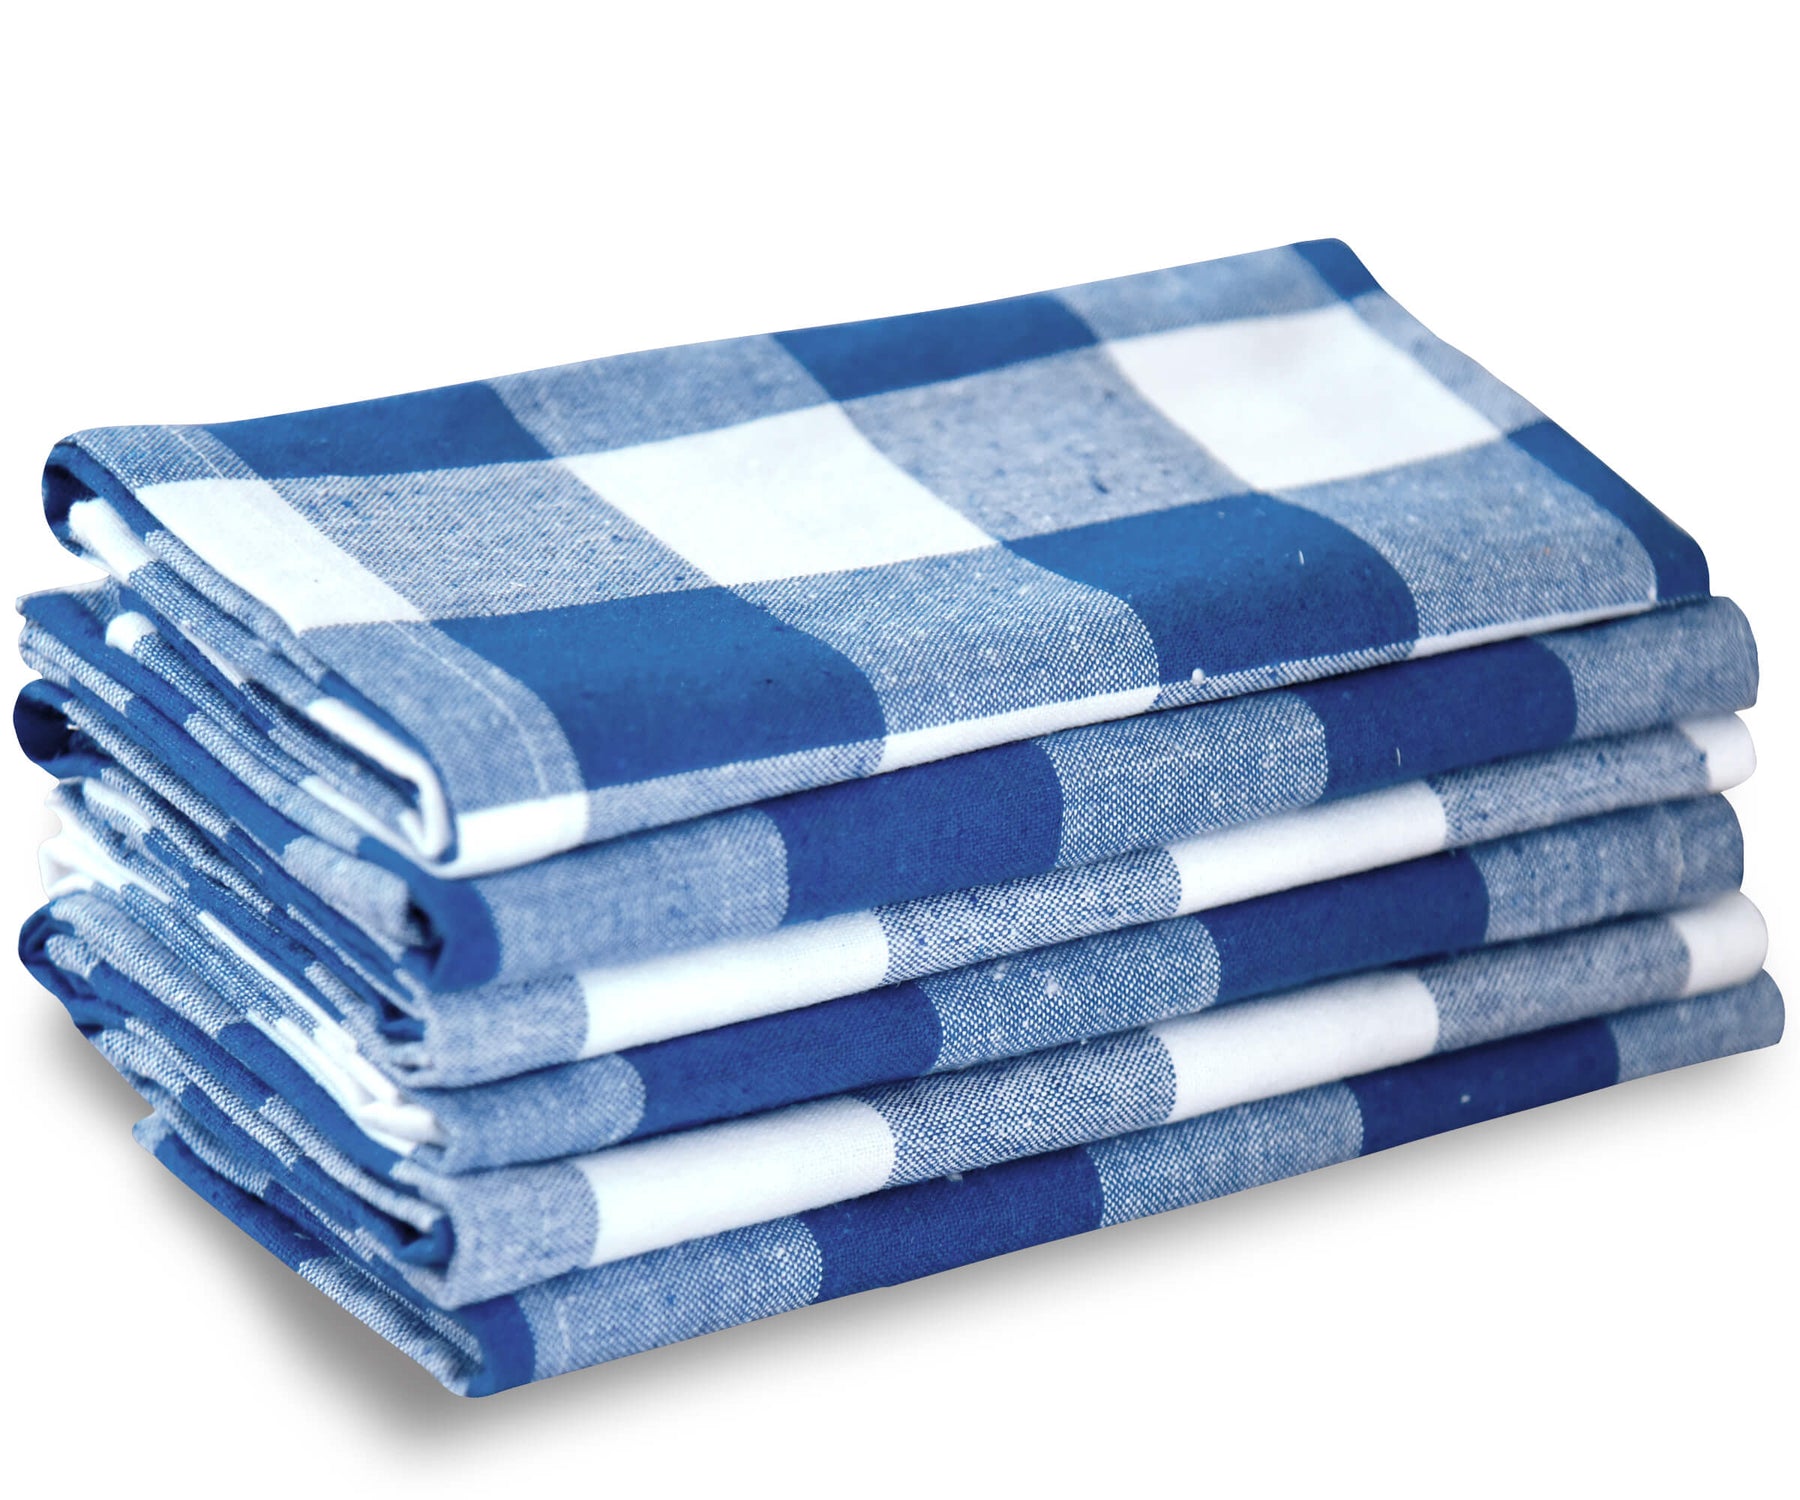 Embrace versatility with blue napkins, easily adapting to casual or formal table settings.